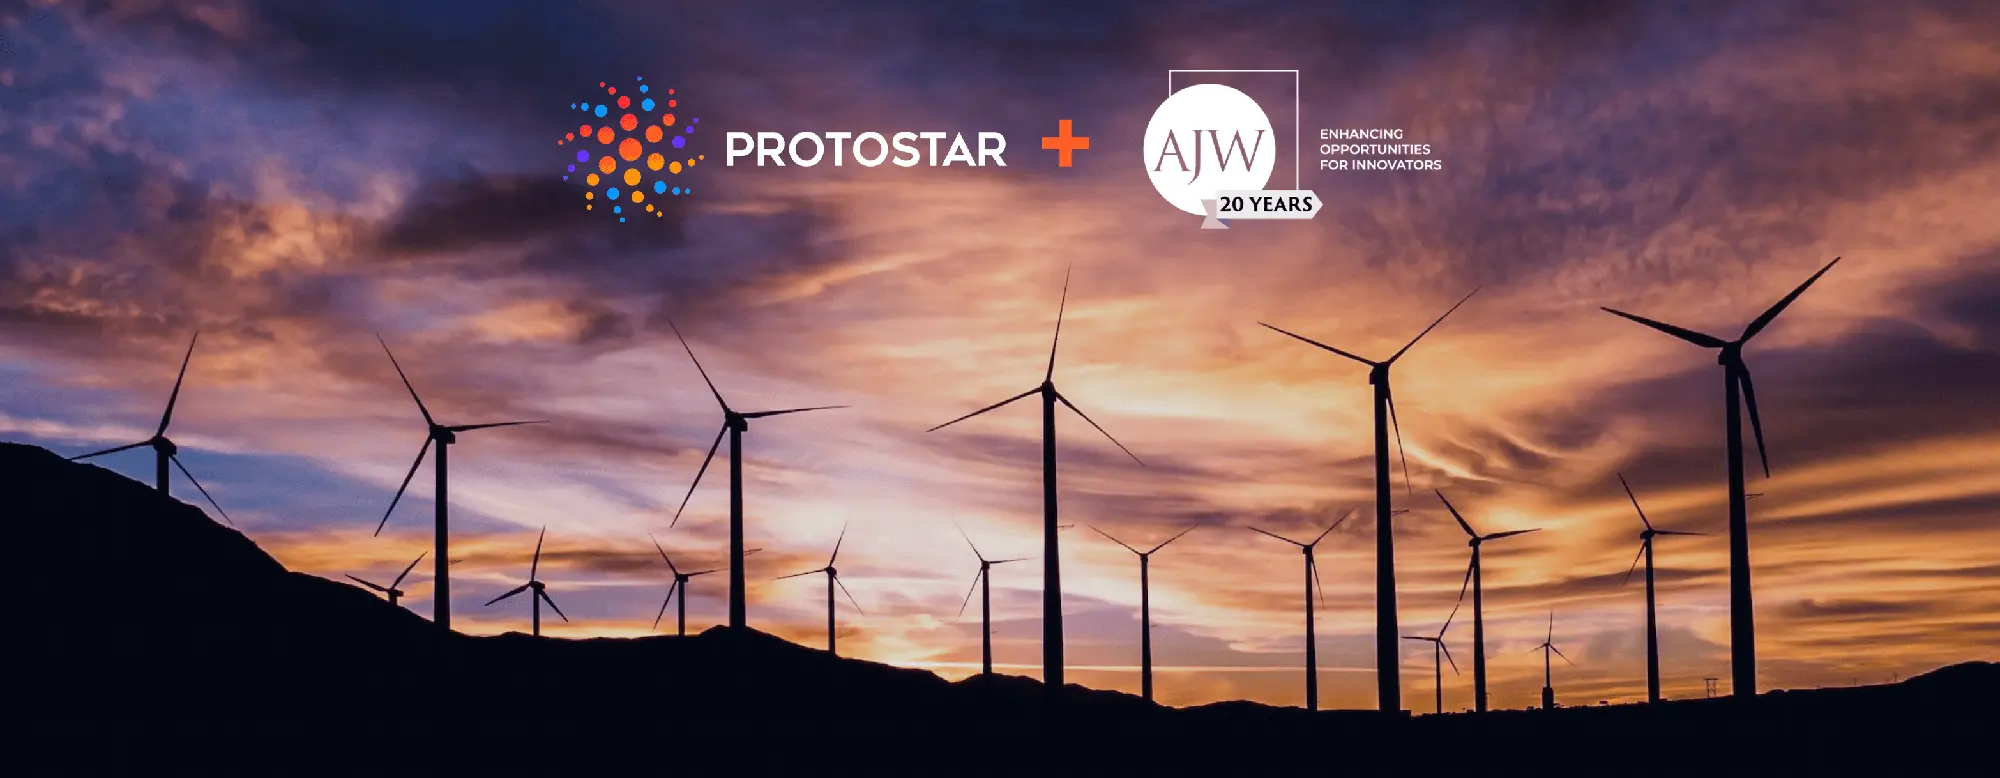 AJW + PROTOSTAR: Empowering Businesses to Accelerate a Decarbonized Economy